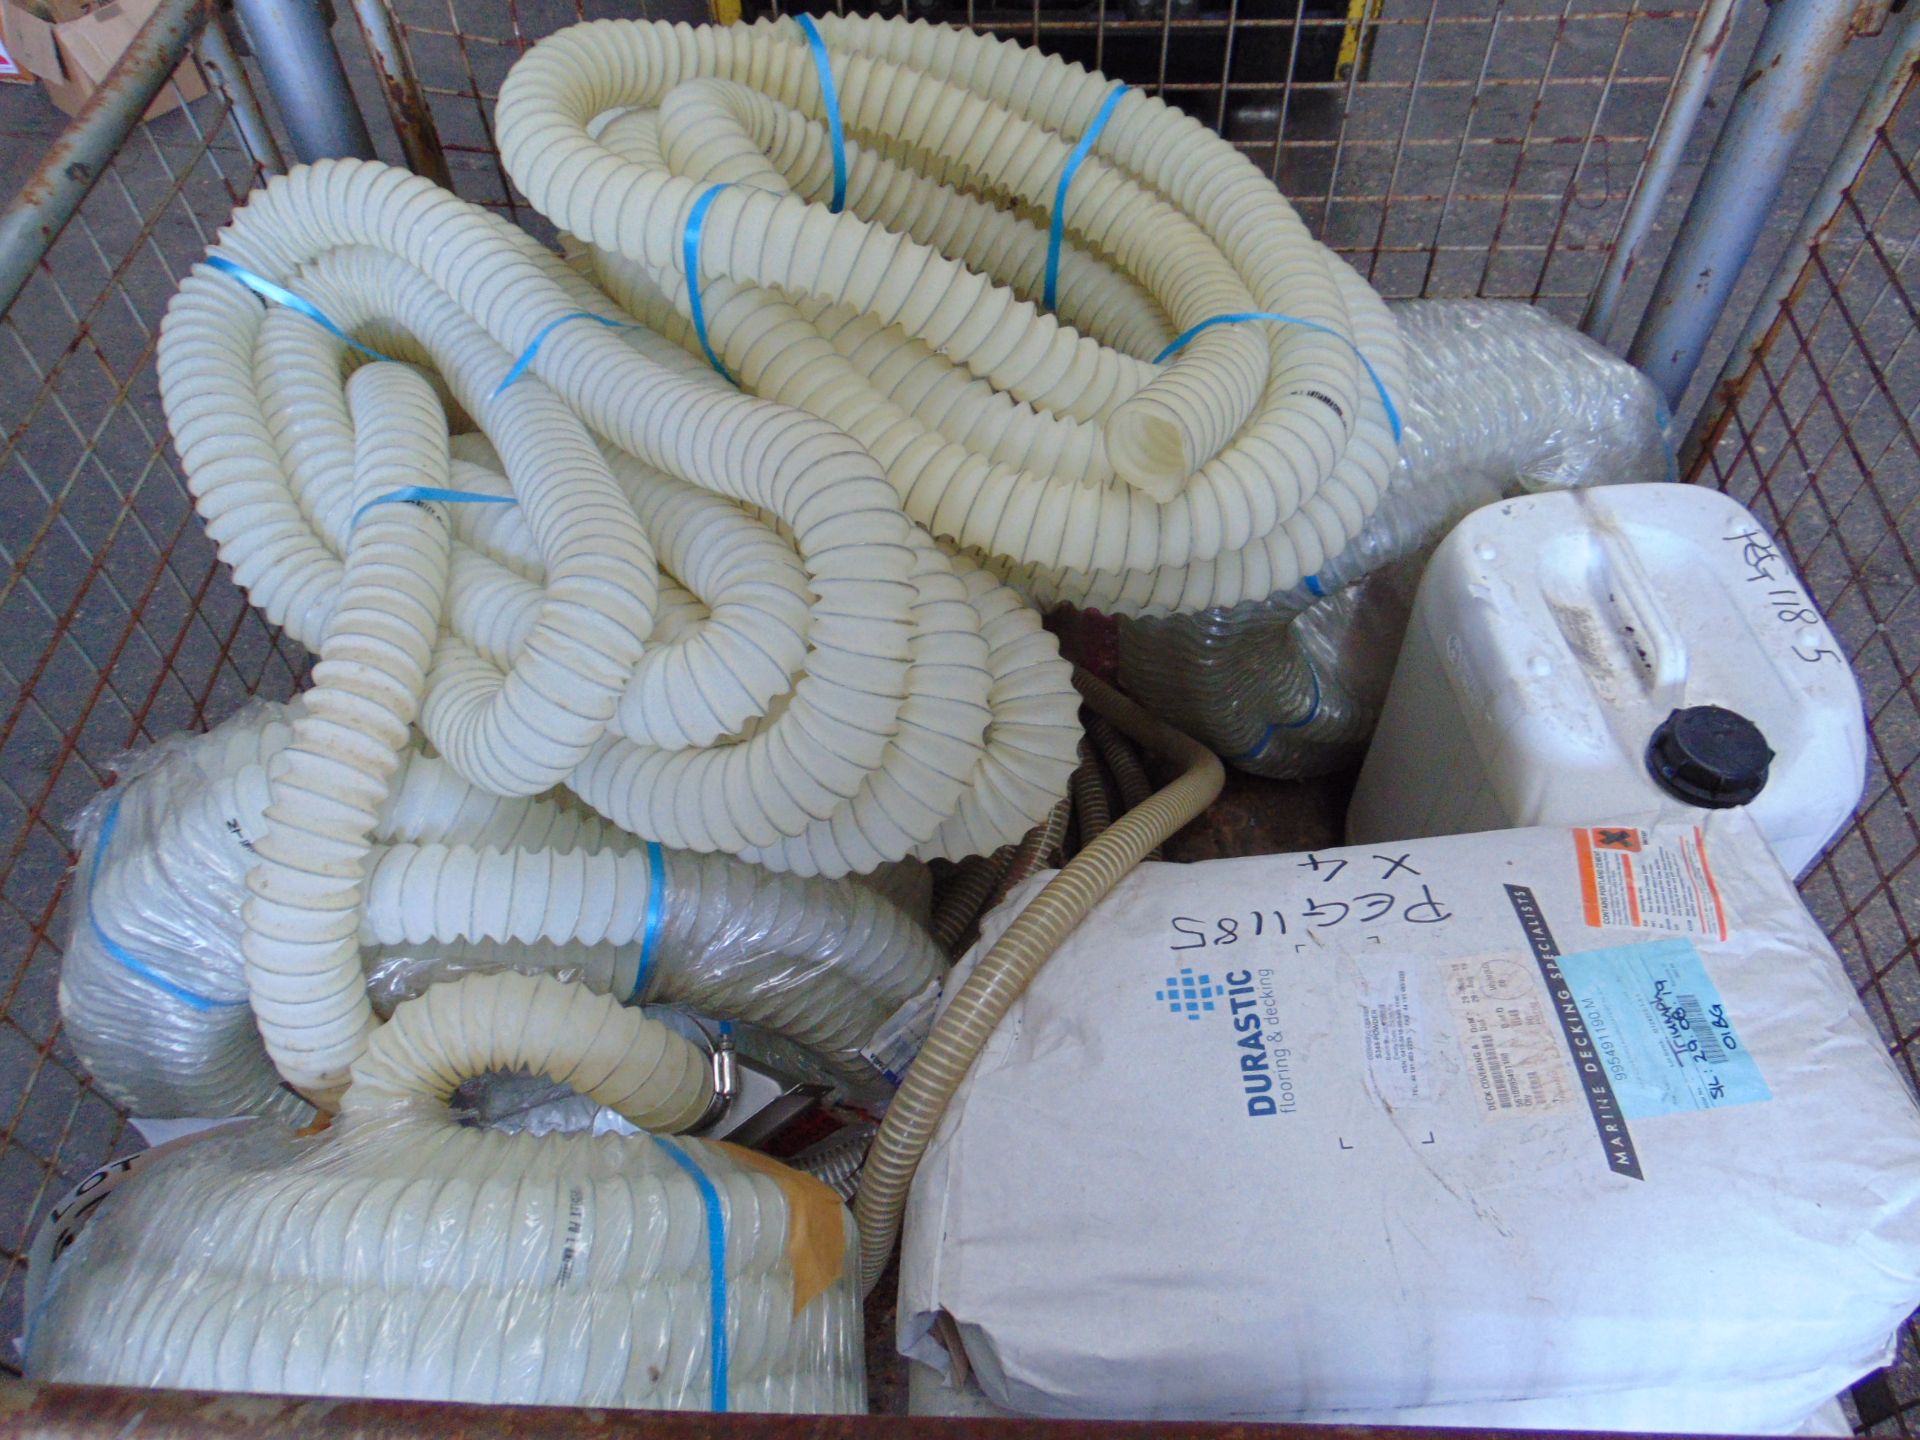 Mixed Stillage including 7 x Flexible Hoses, 4 x Durastic Deck Covering & 1 x 25kg Tub of Durastic